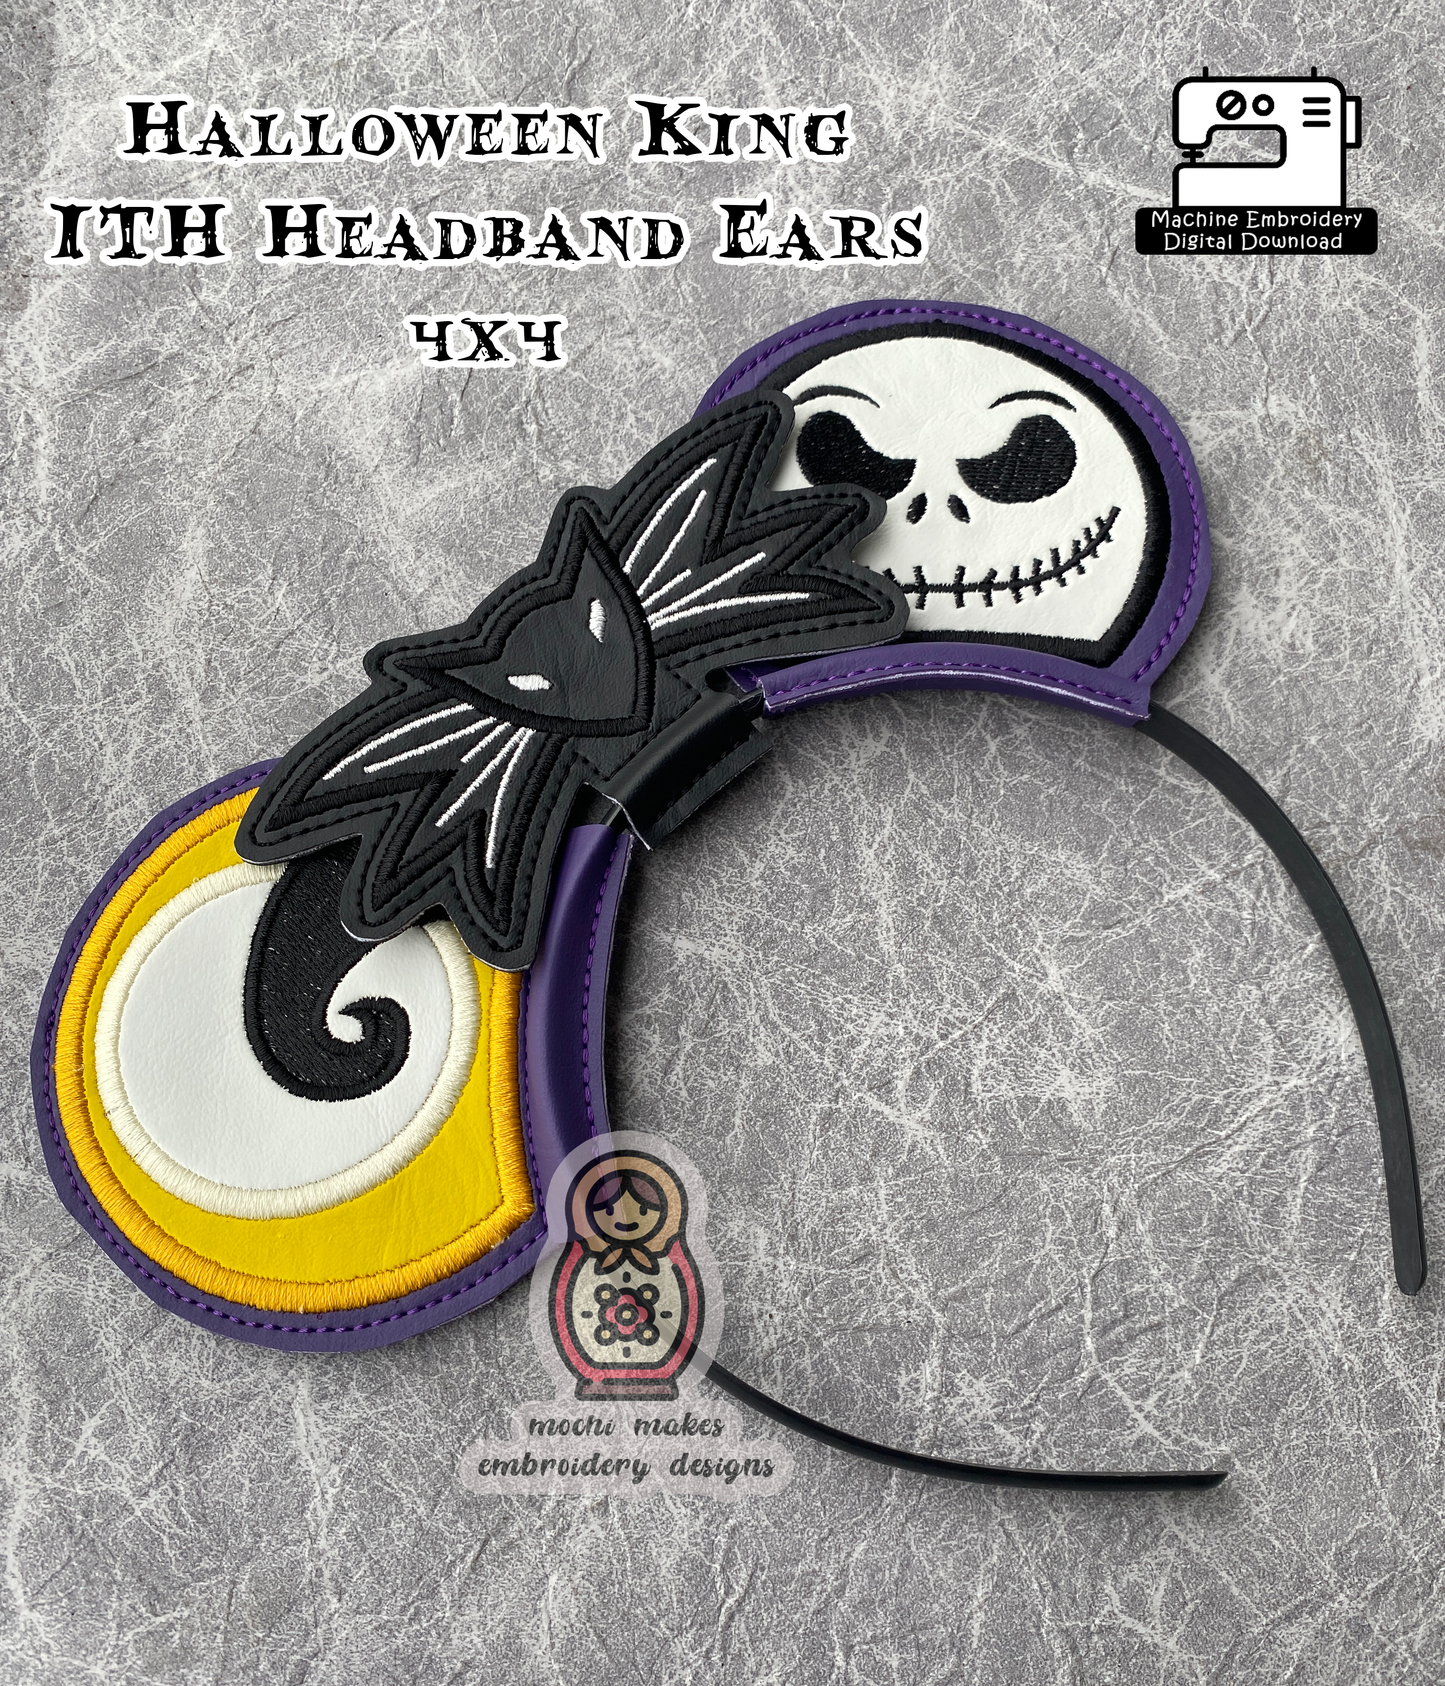 Halloween King ITH Headband Ears 4x4 Jack Machine Embroidery DIY Sew Cosplay In the Hoop Download Pattern Spooky Ghost Witch Horror Gothic